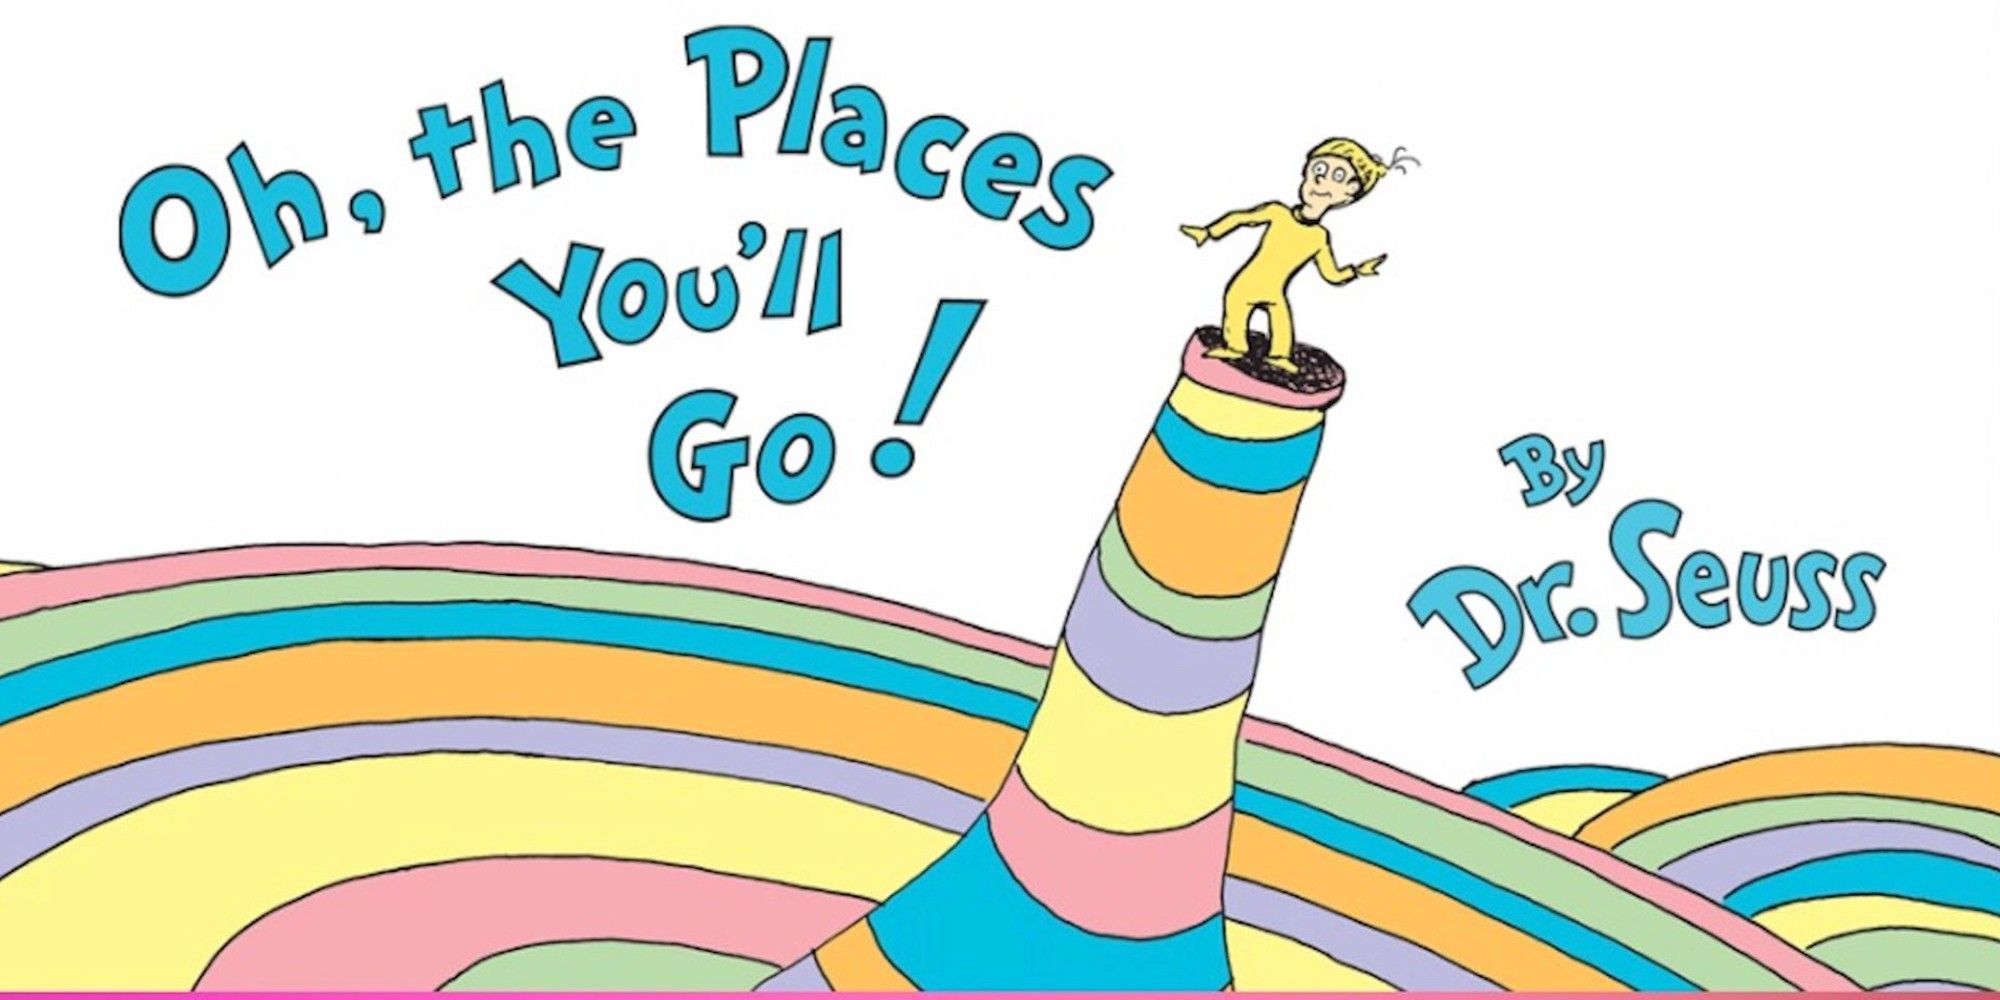 Oh, The Places You'll Go!: Confirmation & Everything We Know